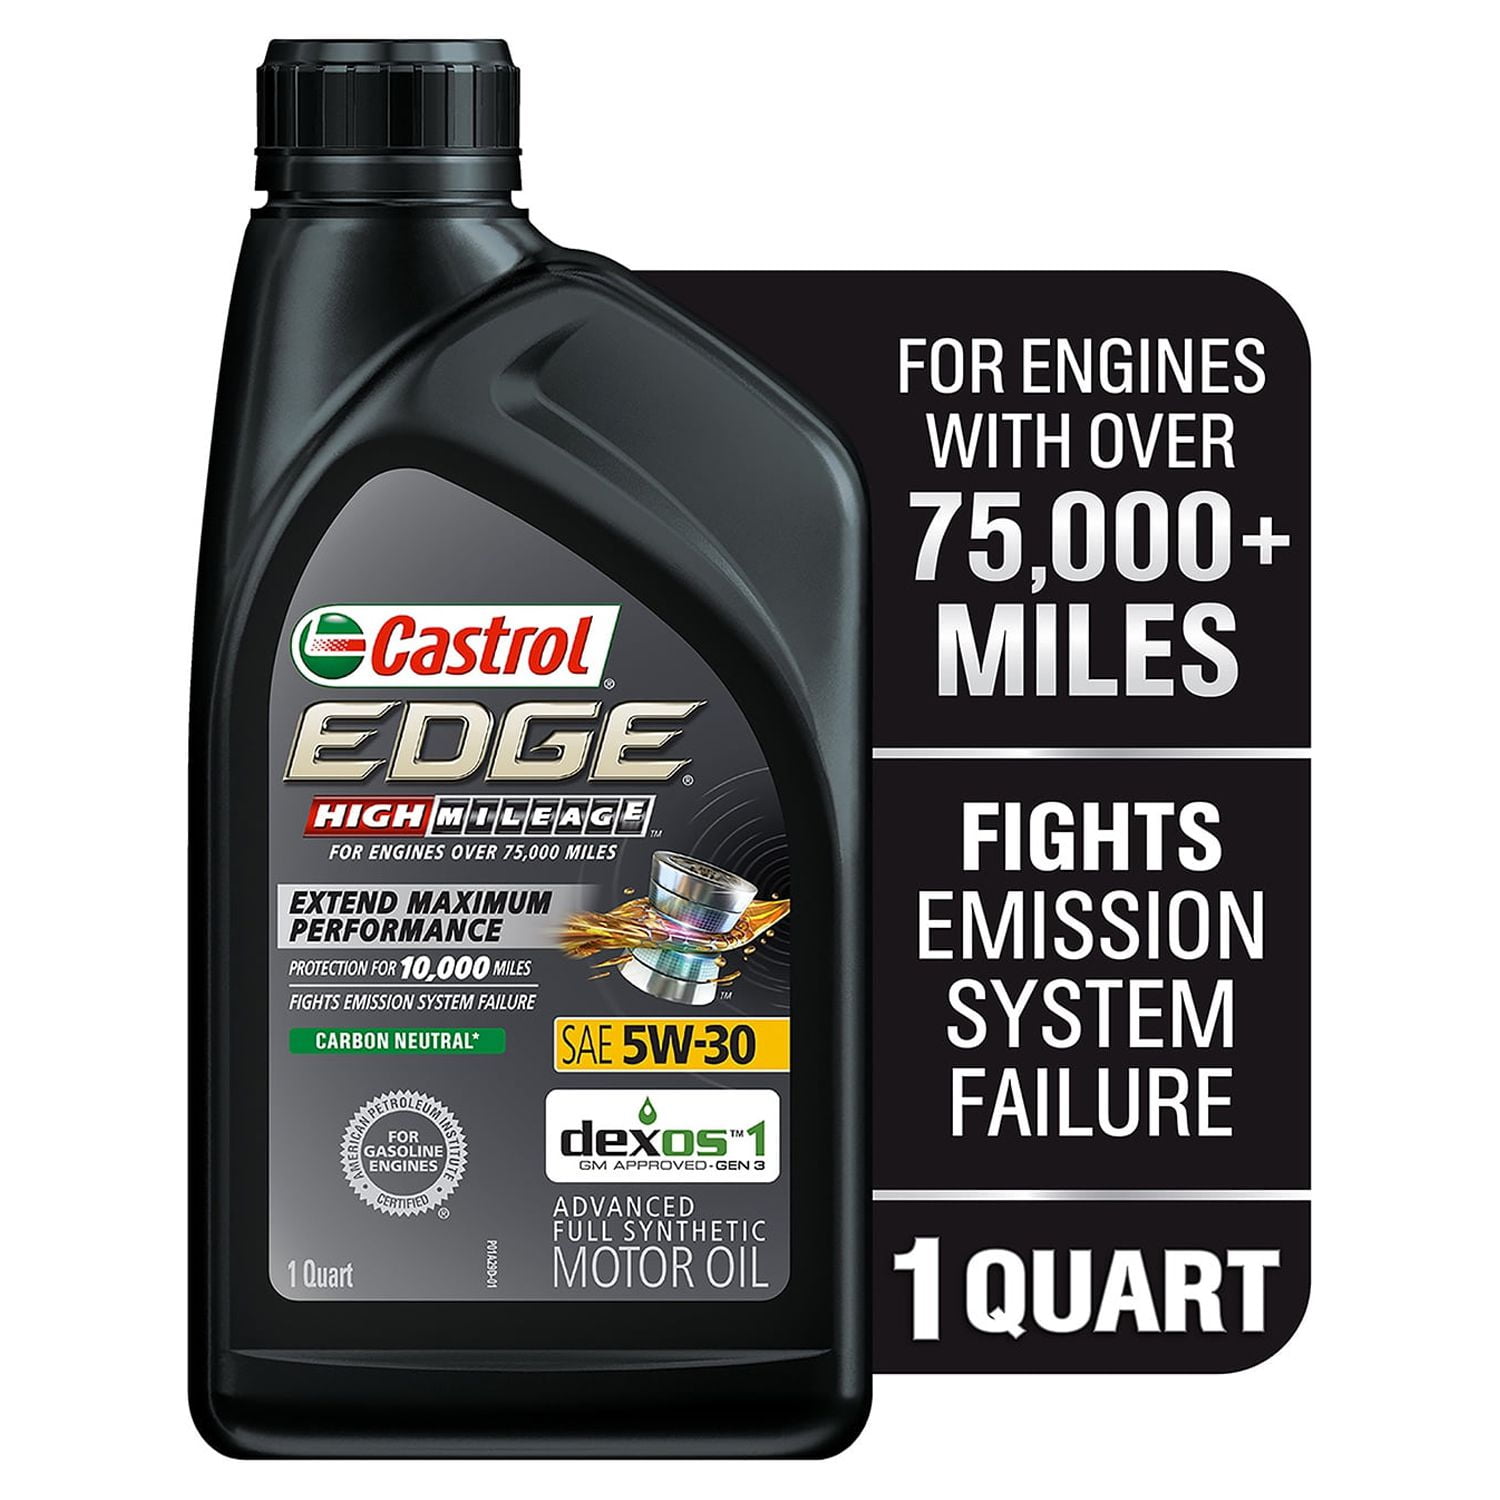 Castrol EDGE Extended Performance 5W-30 Advanced Full Synthetic Motor Oil,  5 Quarts 